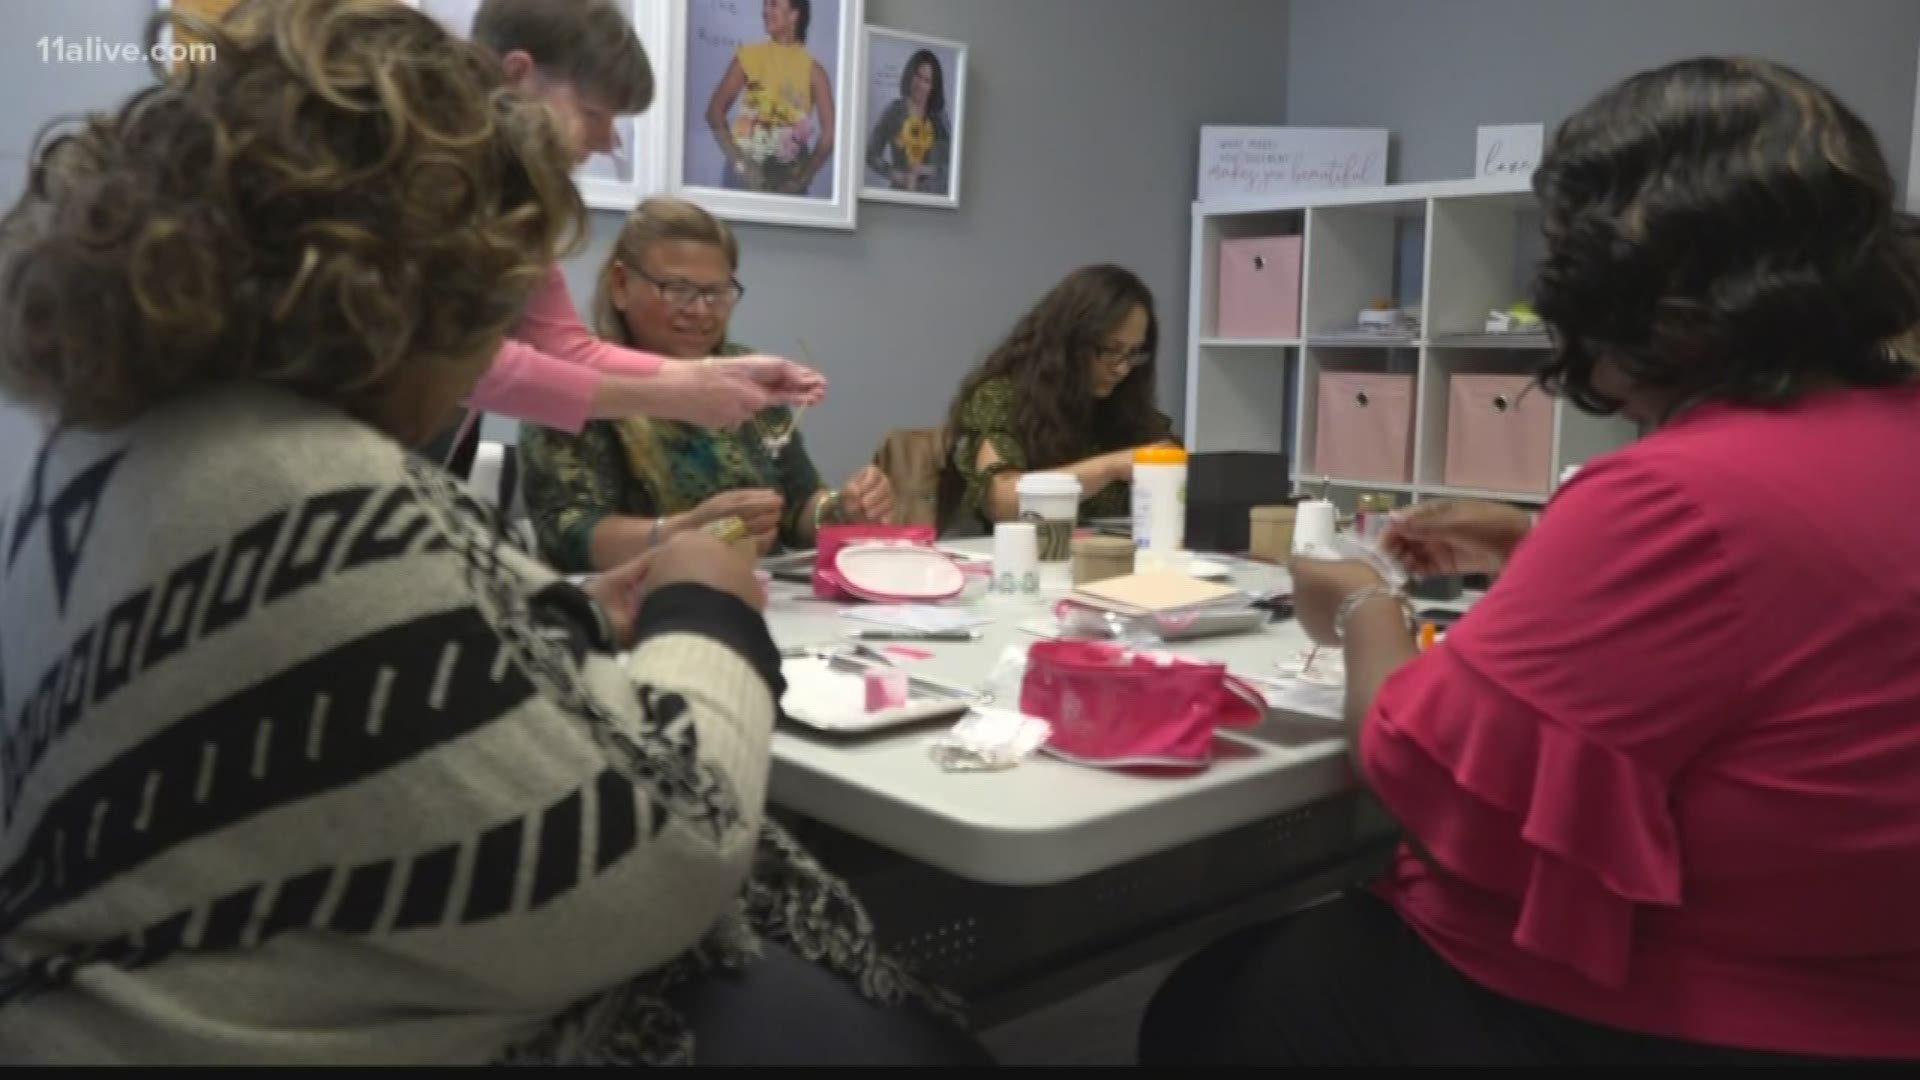 Many cancer survivors struggle with reclaiming a sense of independence after treatment... a local charity is giving them their creativity back